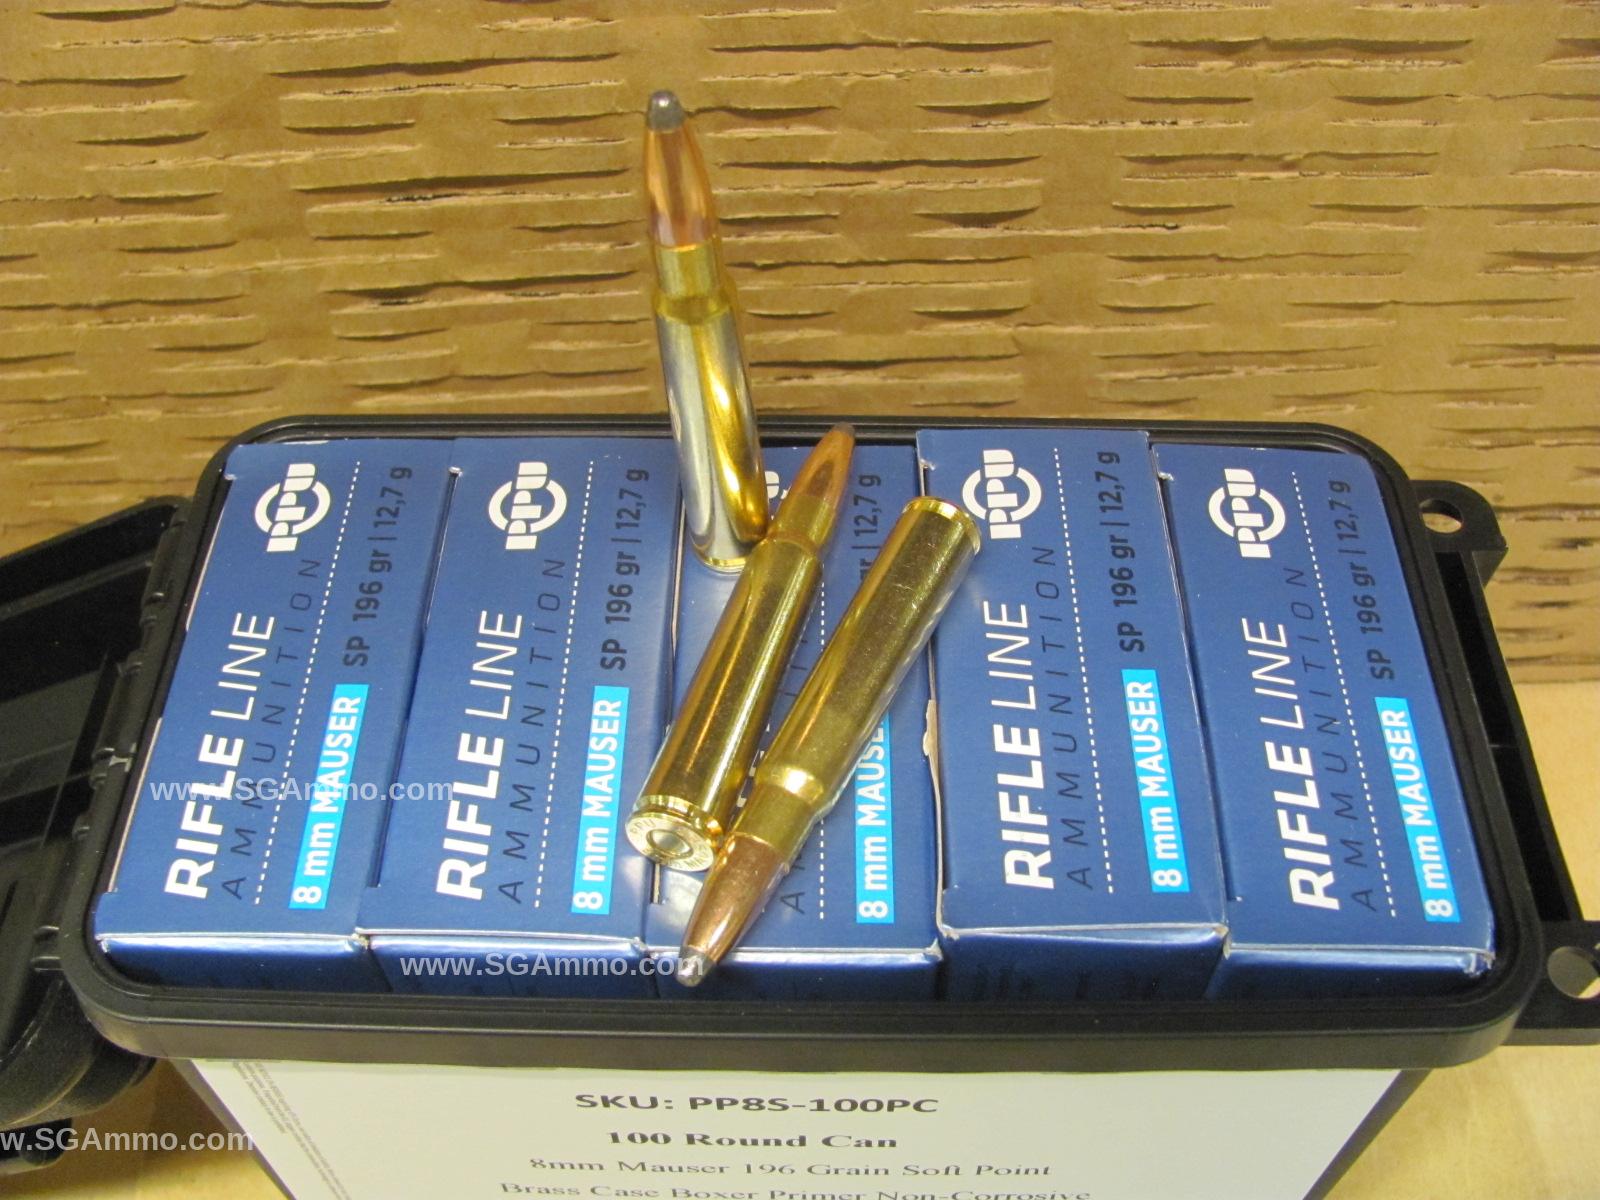 100 Round Plastic Can - 8mm Mauser Soft Point 196 Grain Prvi Partizan Ammo - PP8S - Packed in Small Plastic Canister